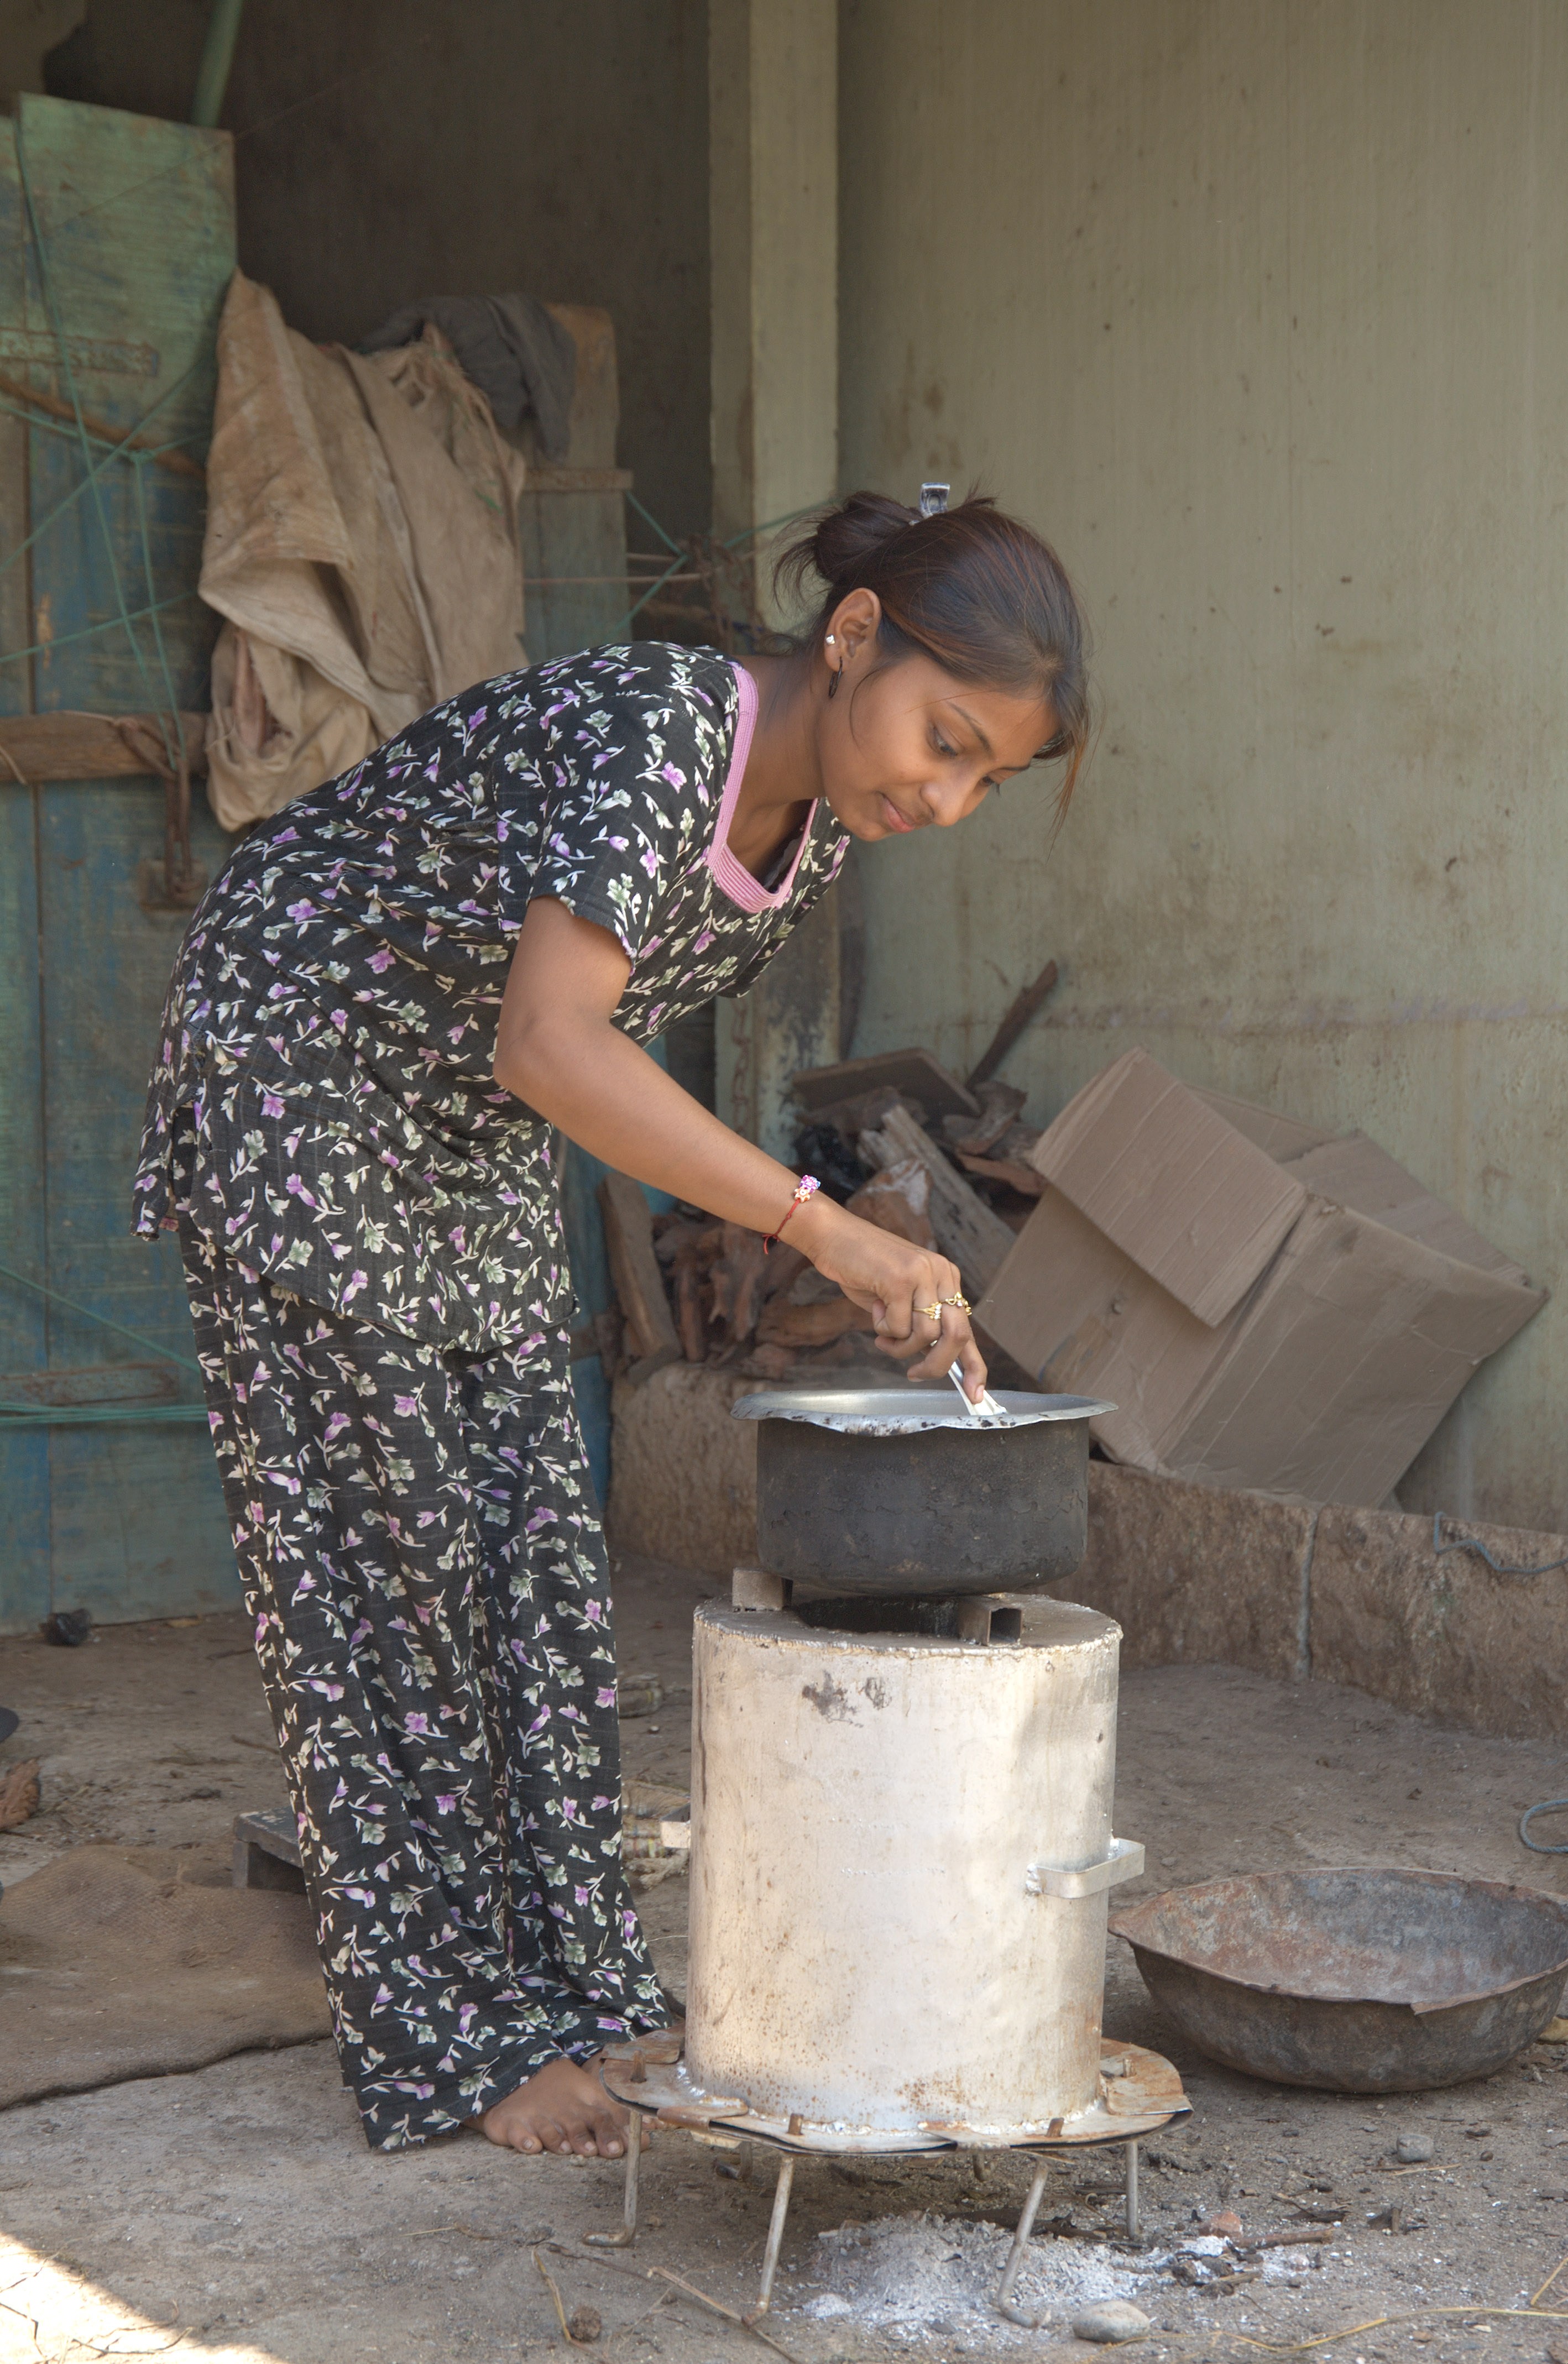 Smoke-free stoves developed, tested and applied by the Aga Khan Planning and Building Services. These stoves have improved the quality of life for poor families in the Gir Forest (Gujarat, India) who suffer from unacceptable levels of indoor air pollution